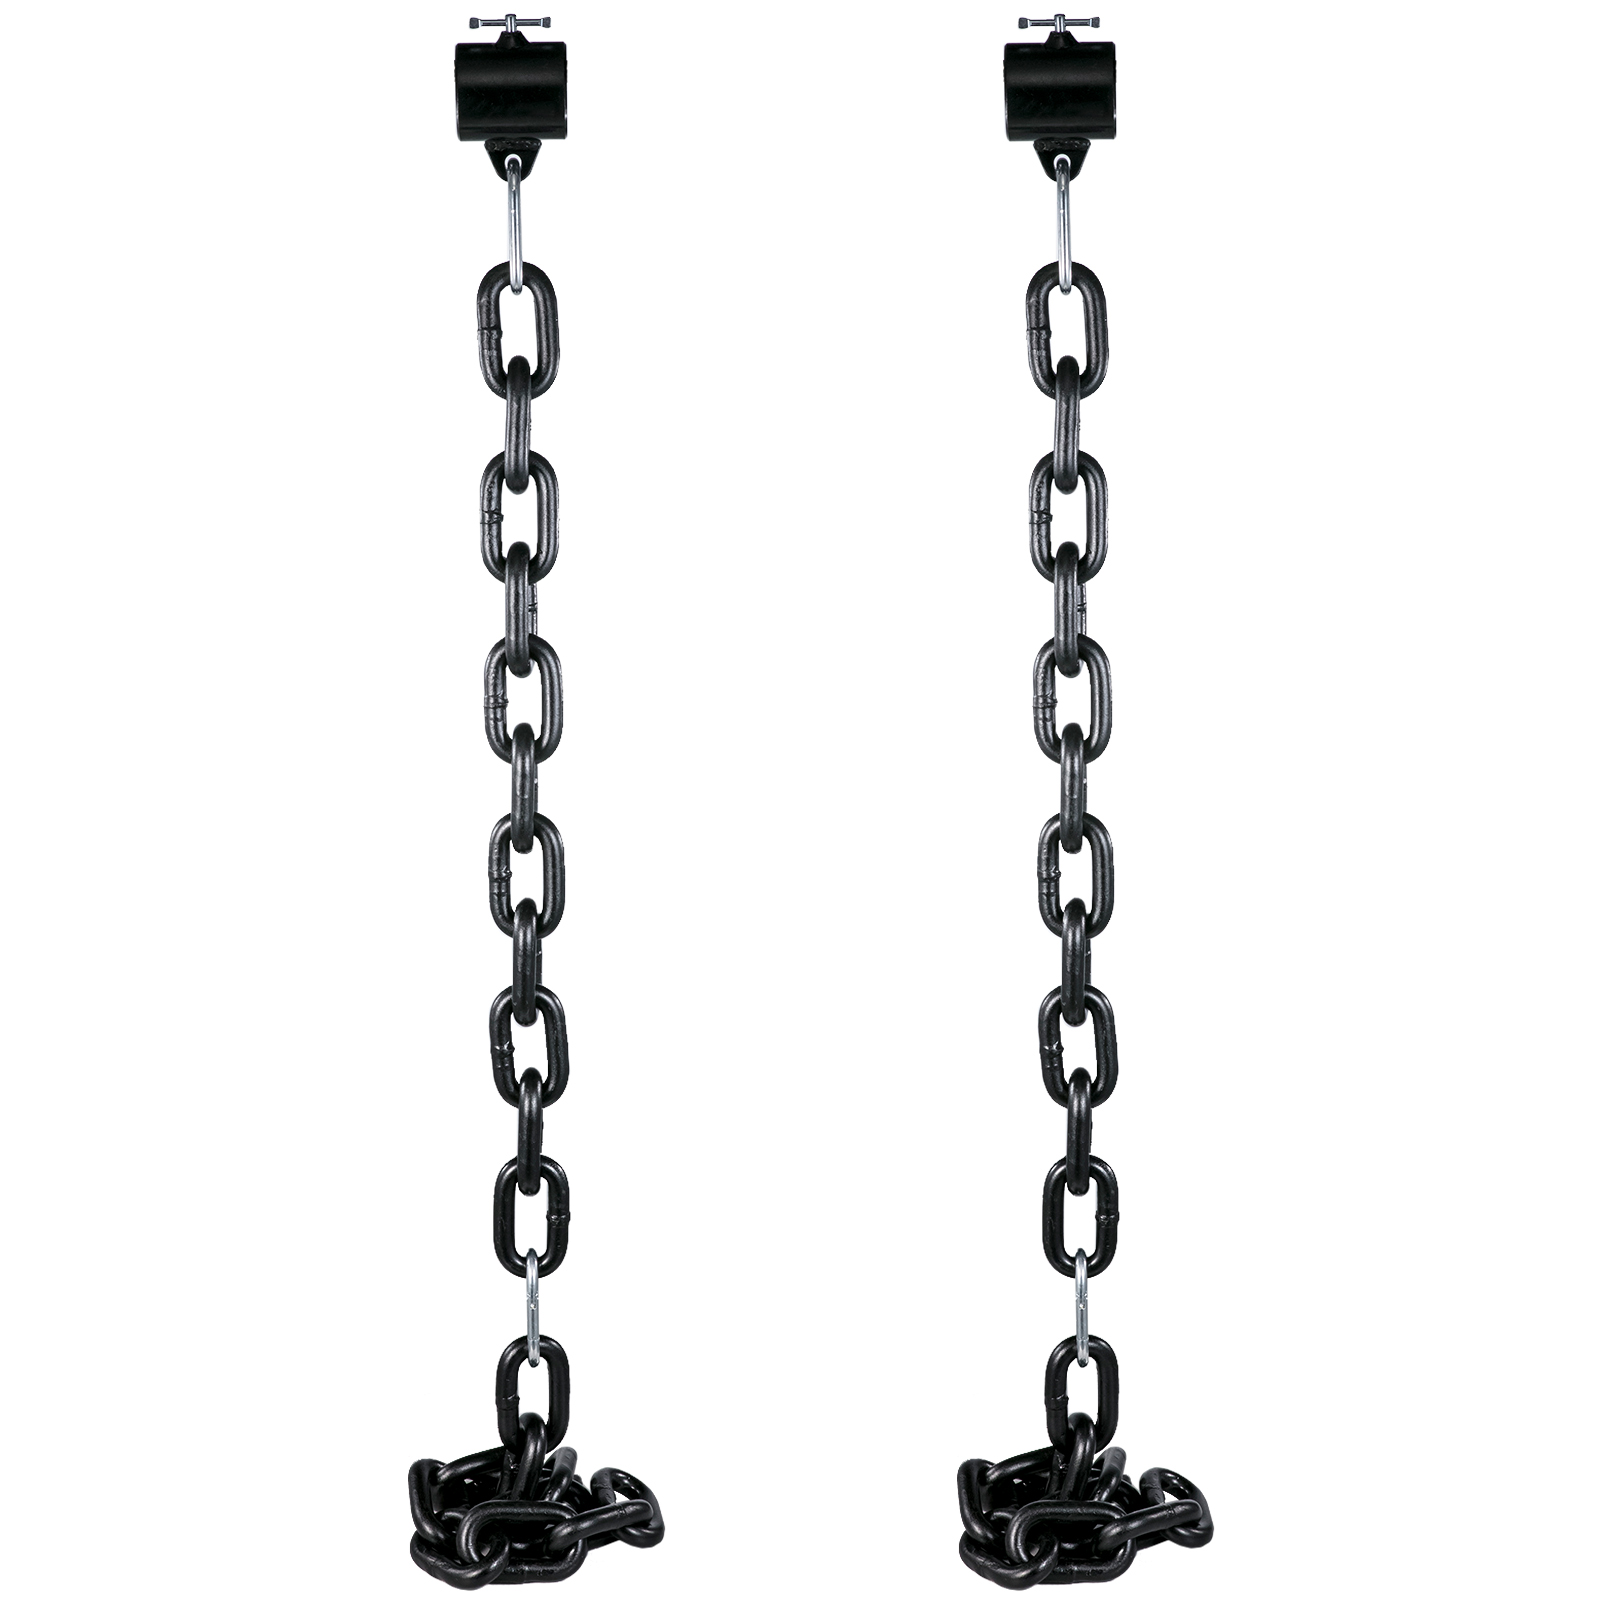 Weight Lifting Chains Pairs 44lb/20KG Olympic Barbell Chain Training w/Collars от Vevor Many GEOs